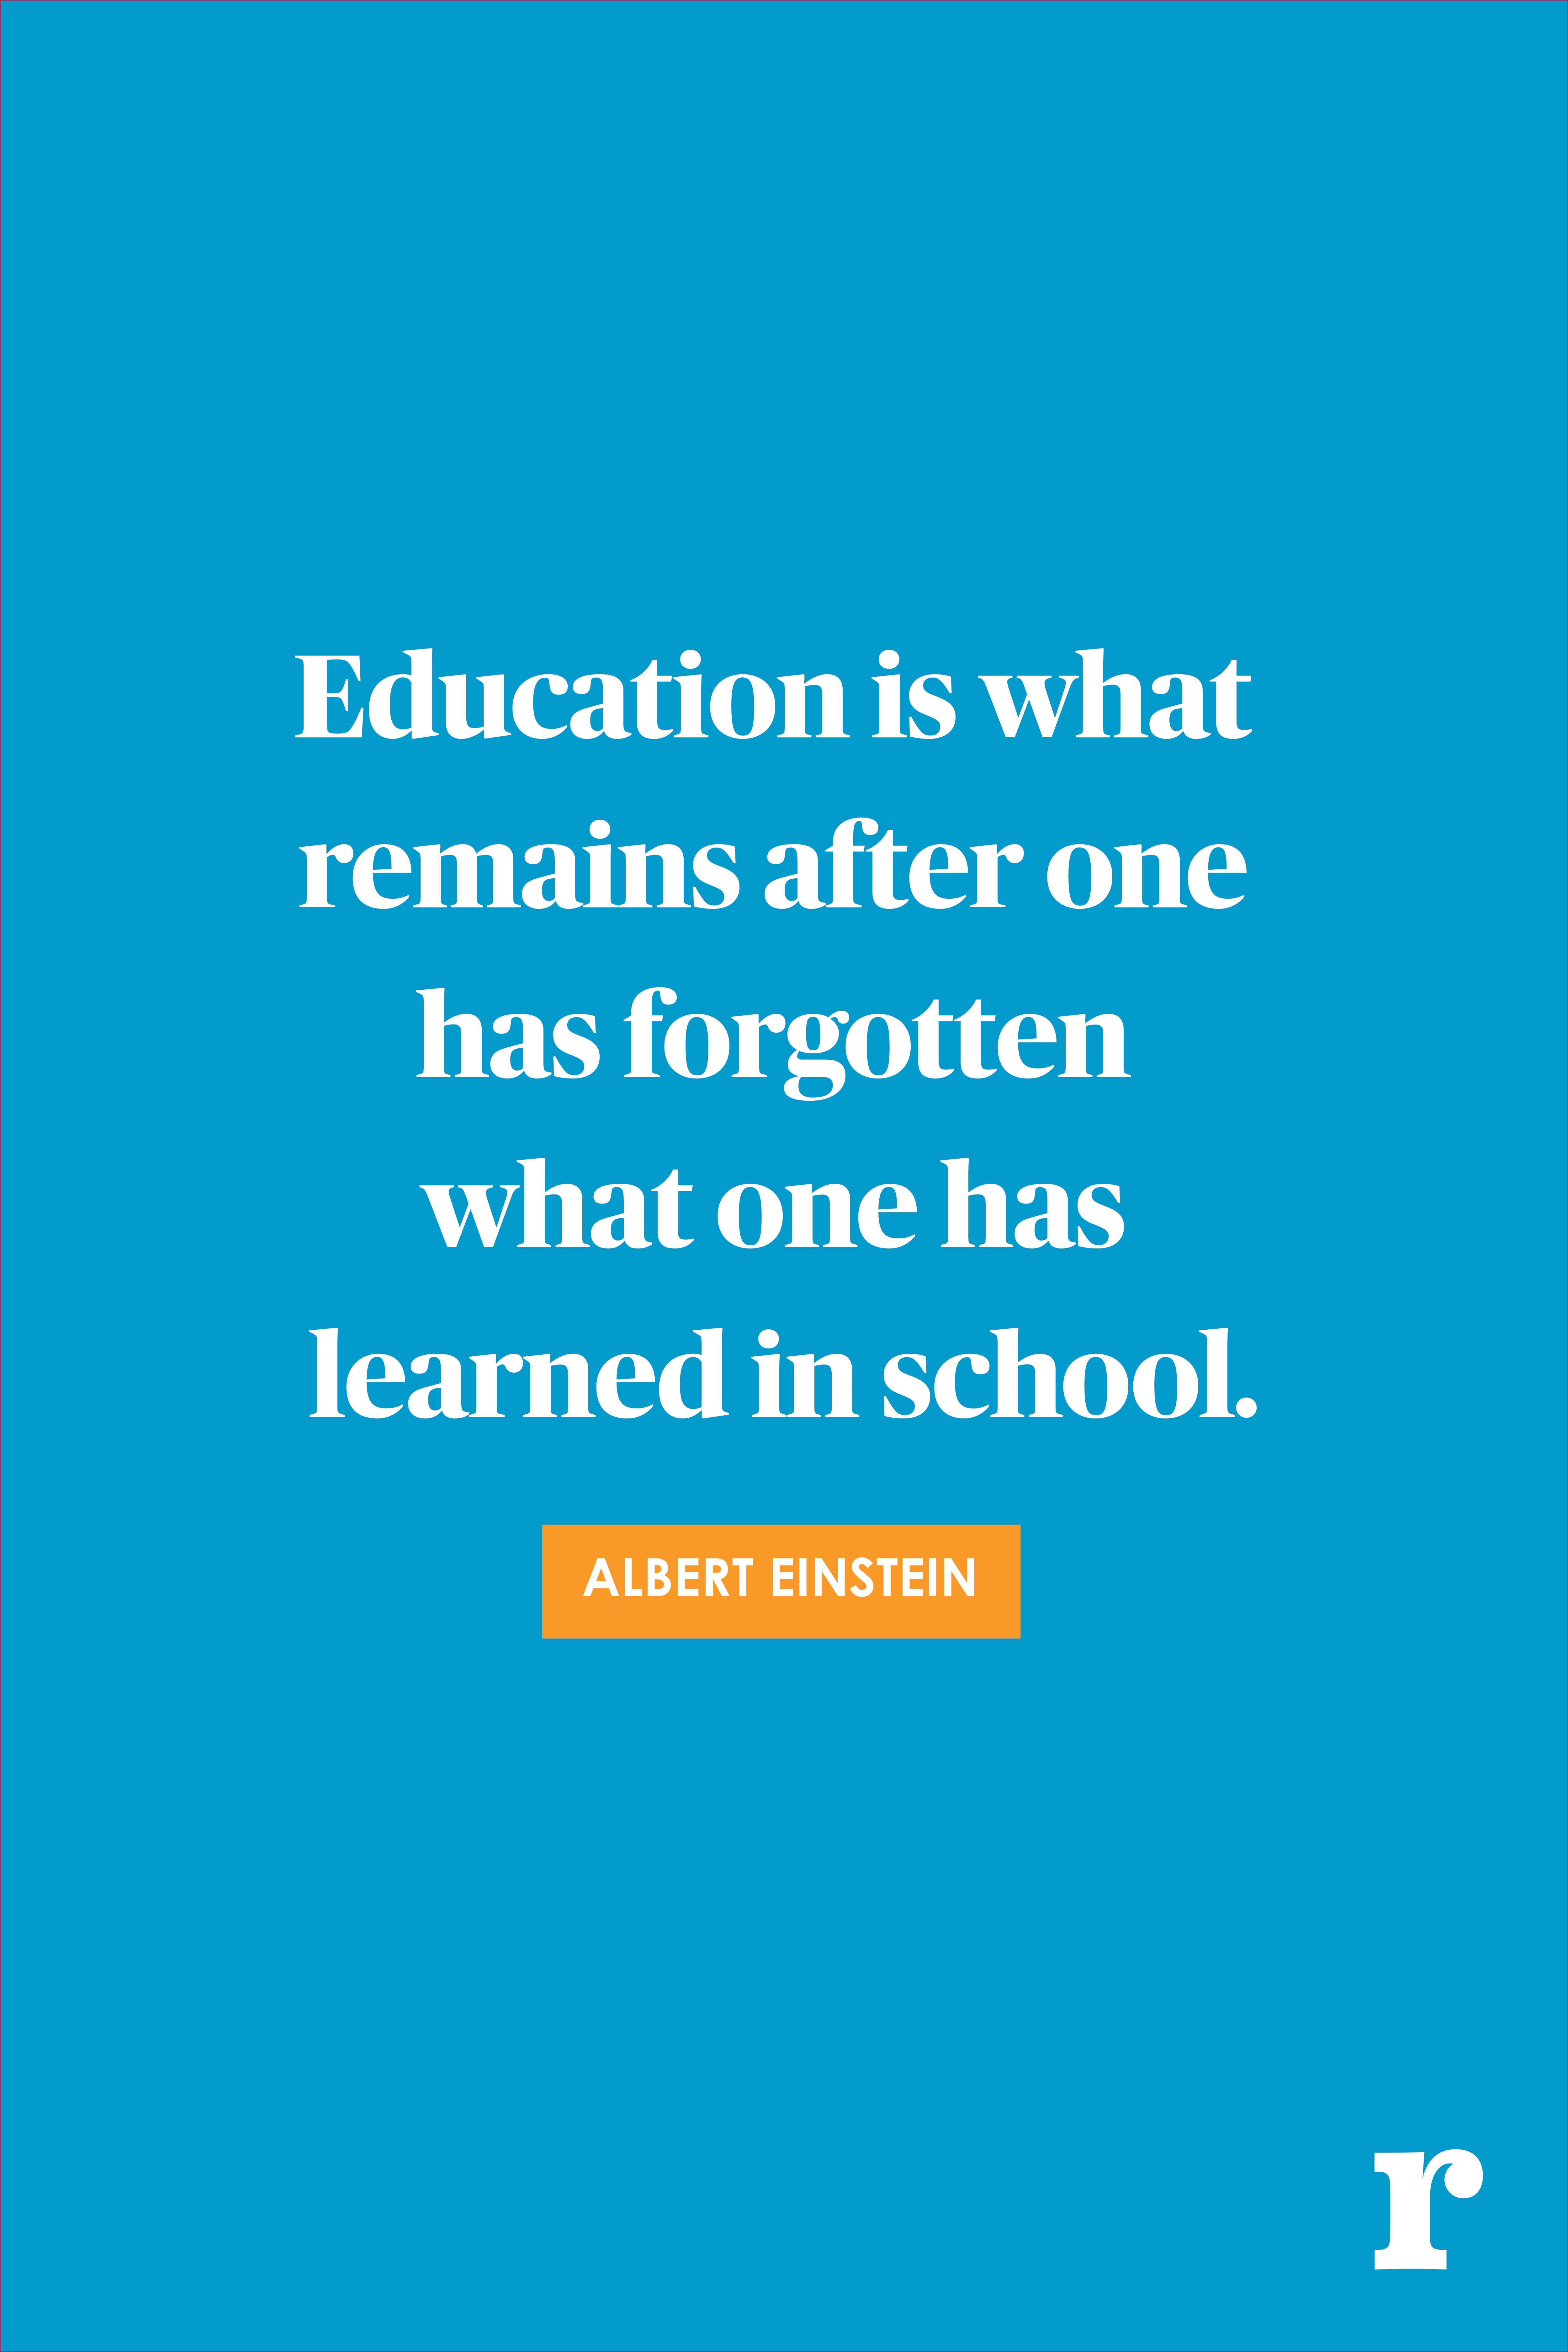 Top 5 education quotes